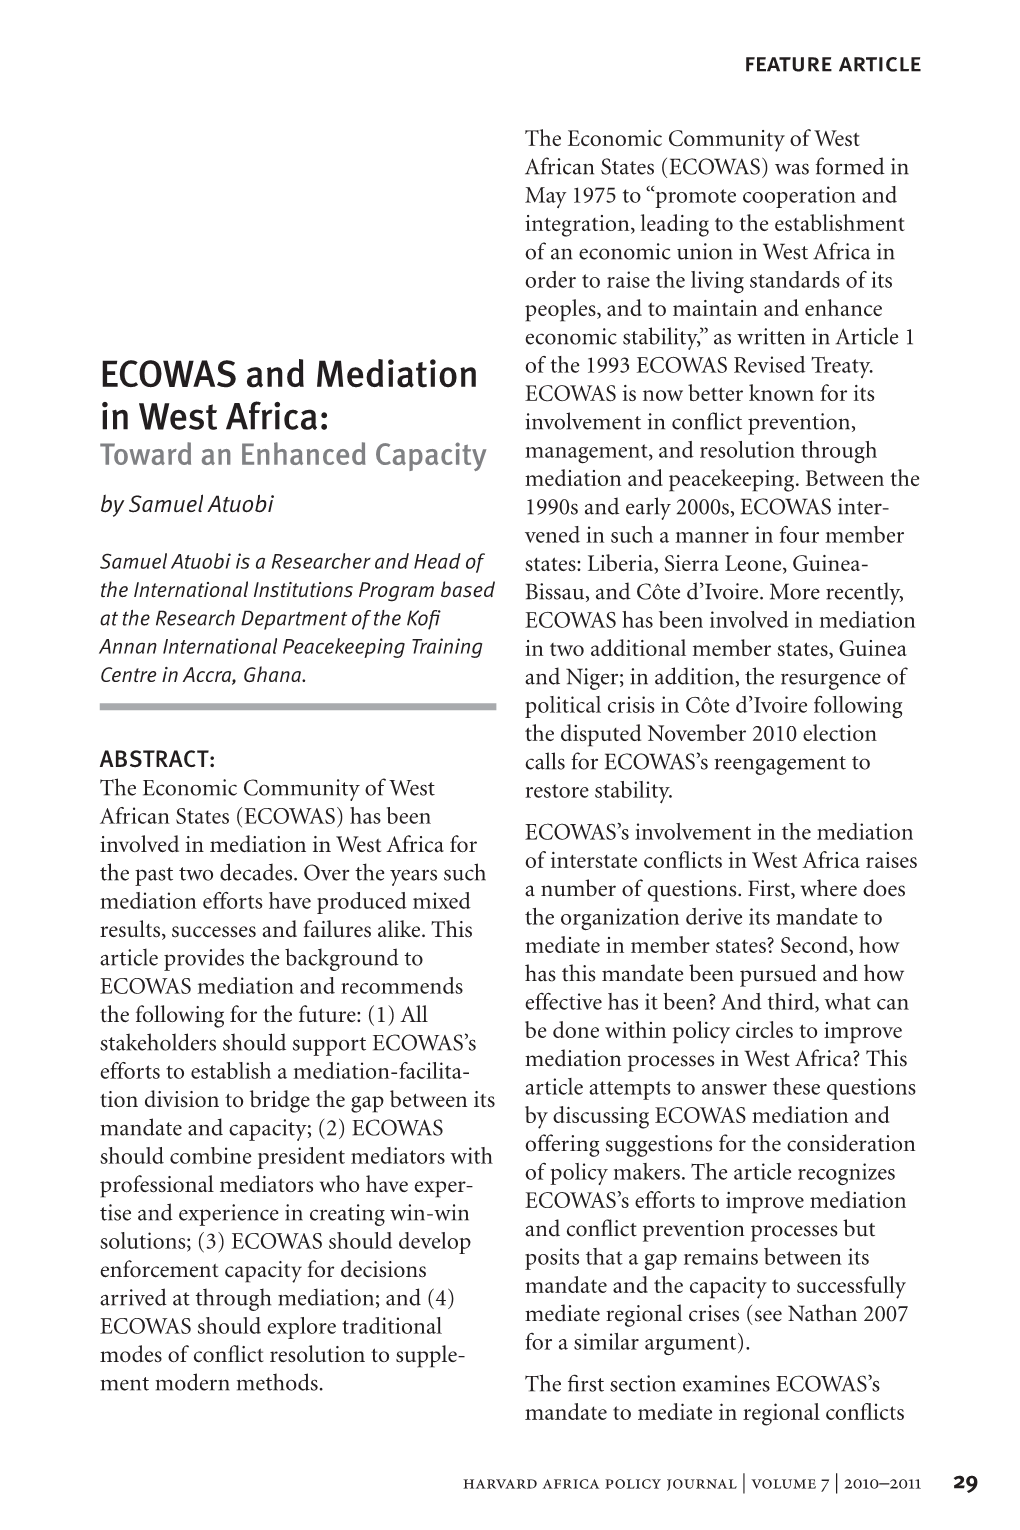 ECOWAS and Mediation in West Africa